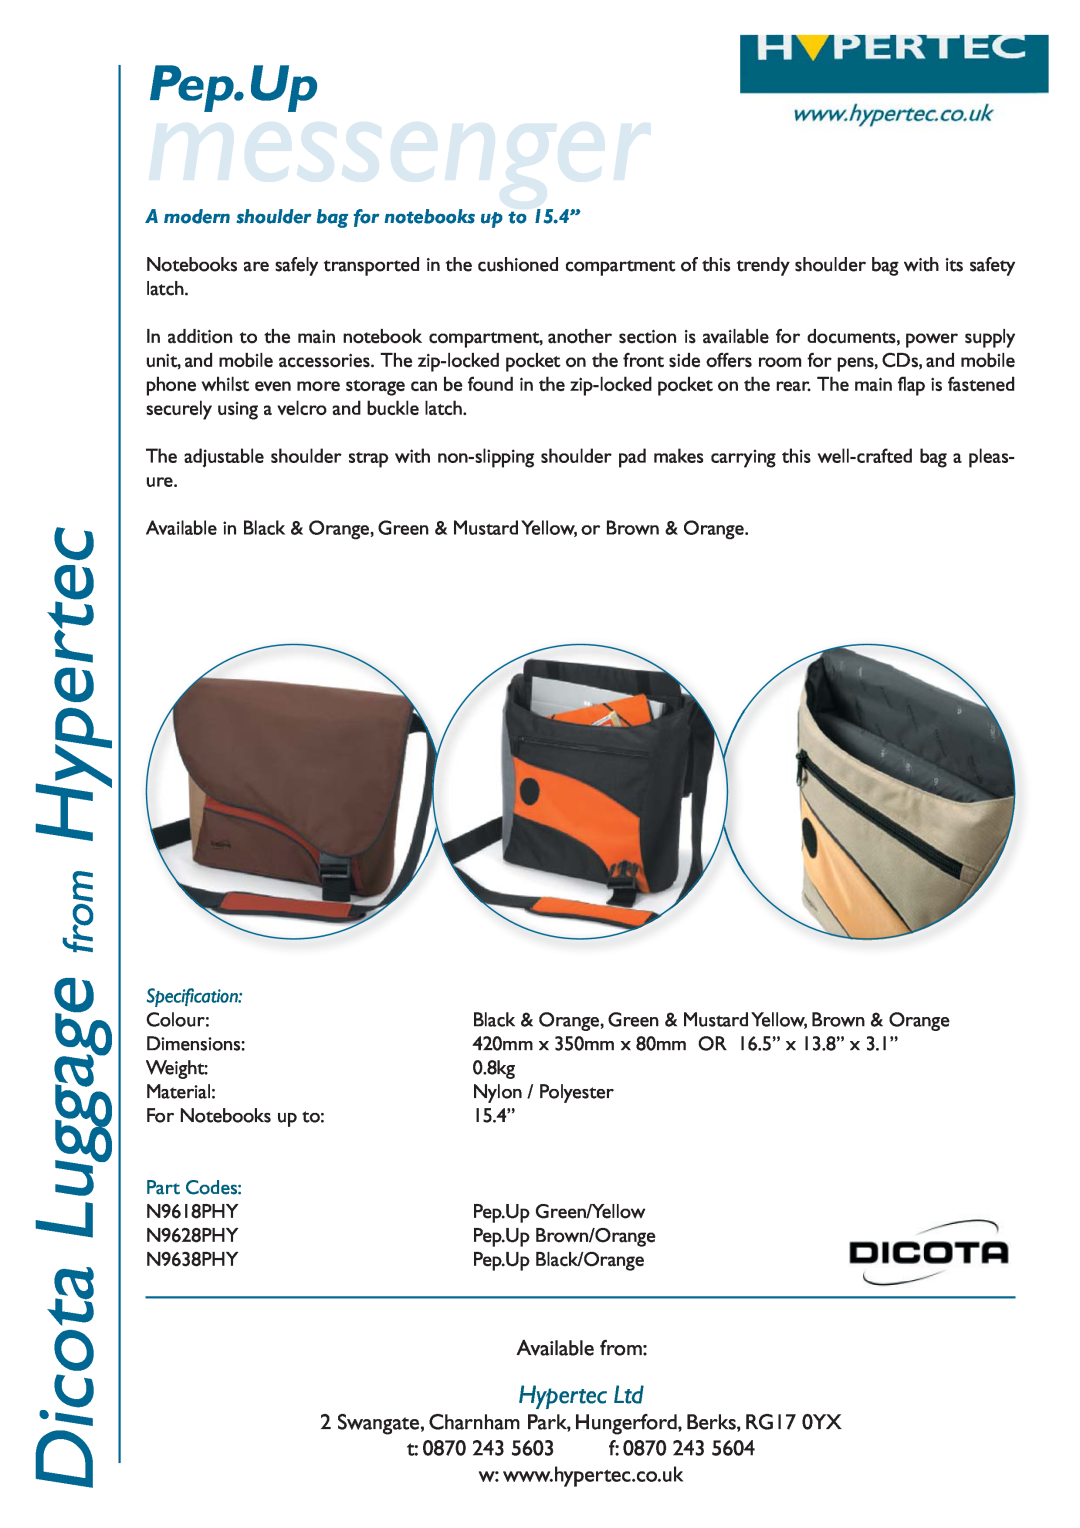 Hypertec N9618PHY dimensions messenger, Dicota Luggage from Hypertec, Pep.Up, Available from, t 0870 243, Specification 